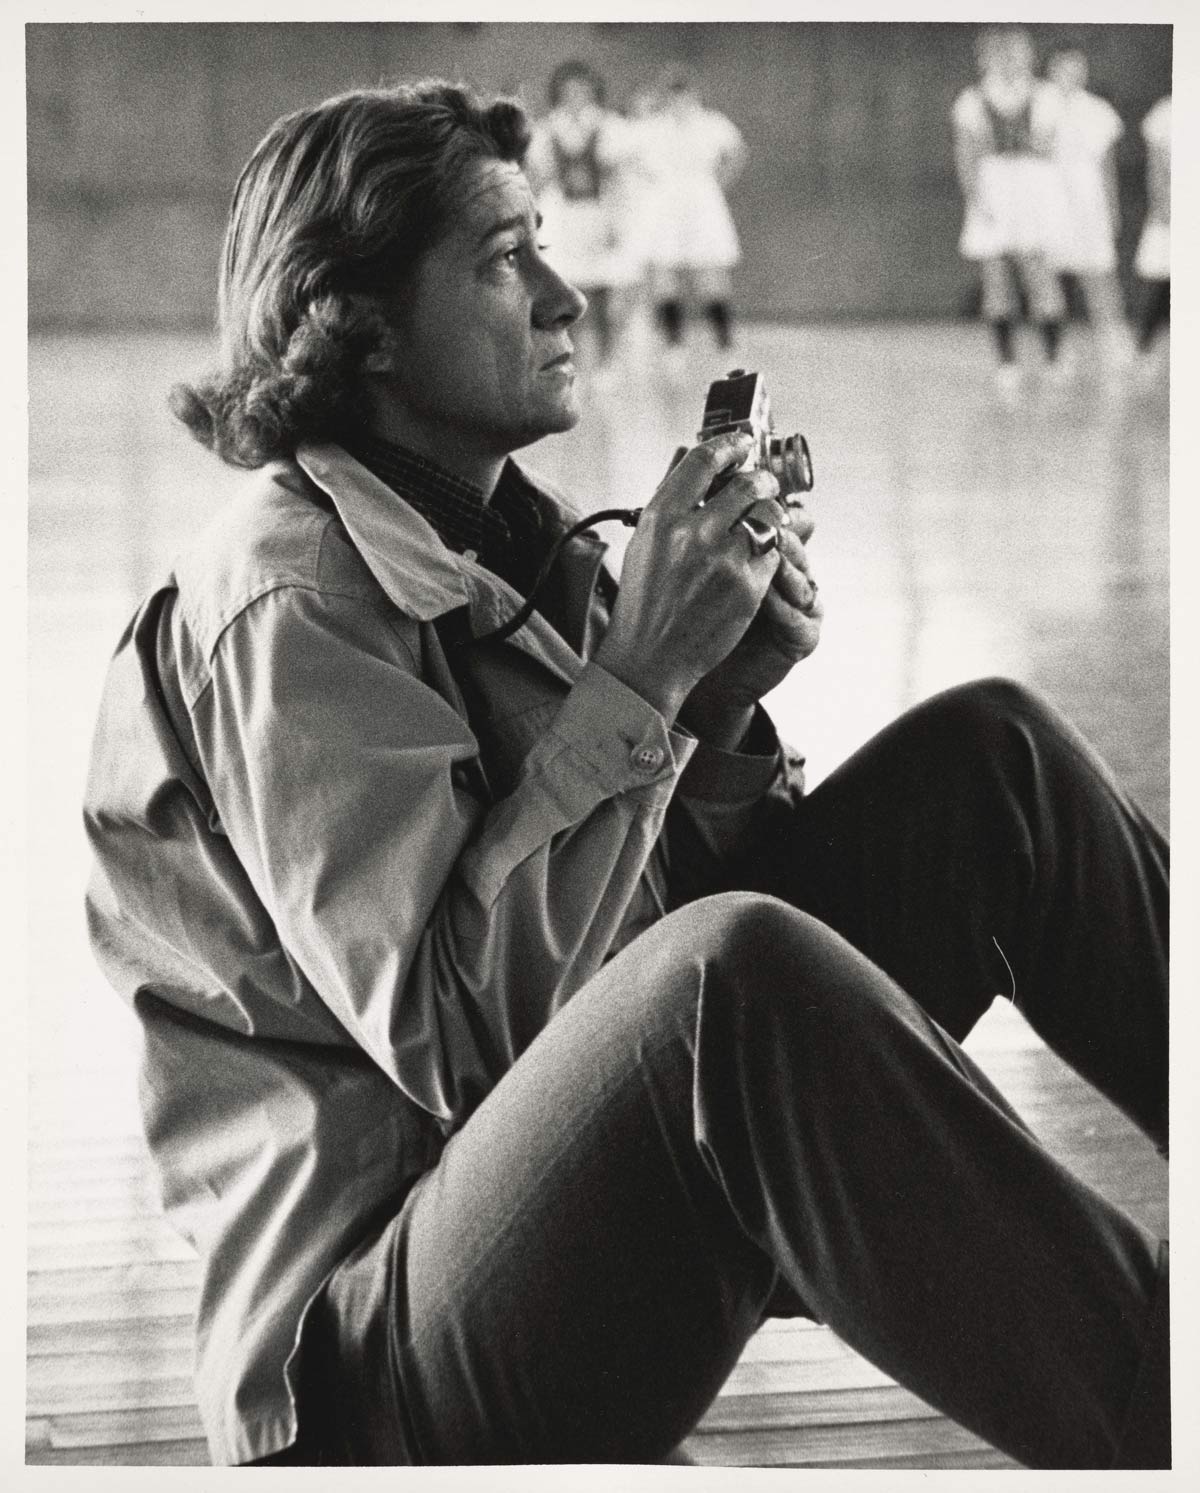 Portrait of photographer Rollie McKenna, class of 1940, with a camera, at work at a gymnasium at Yale.